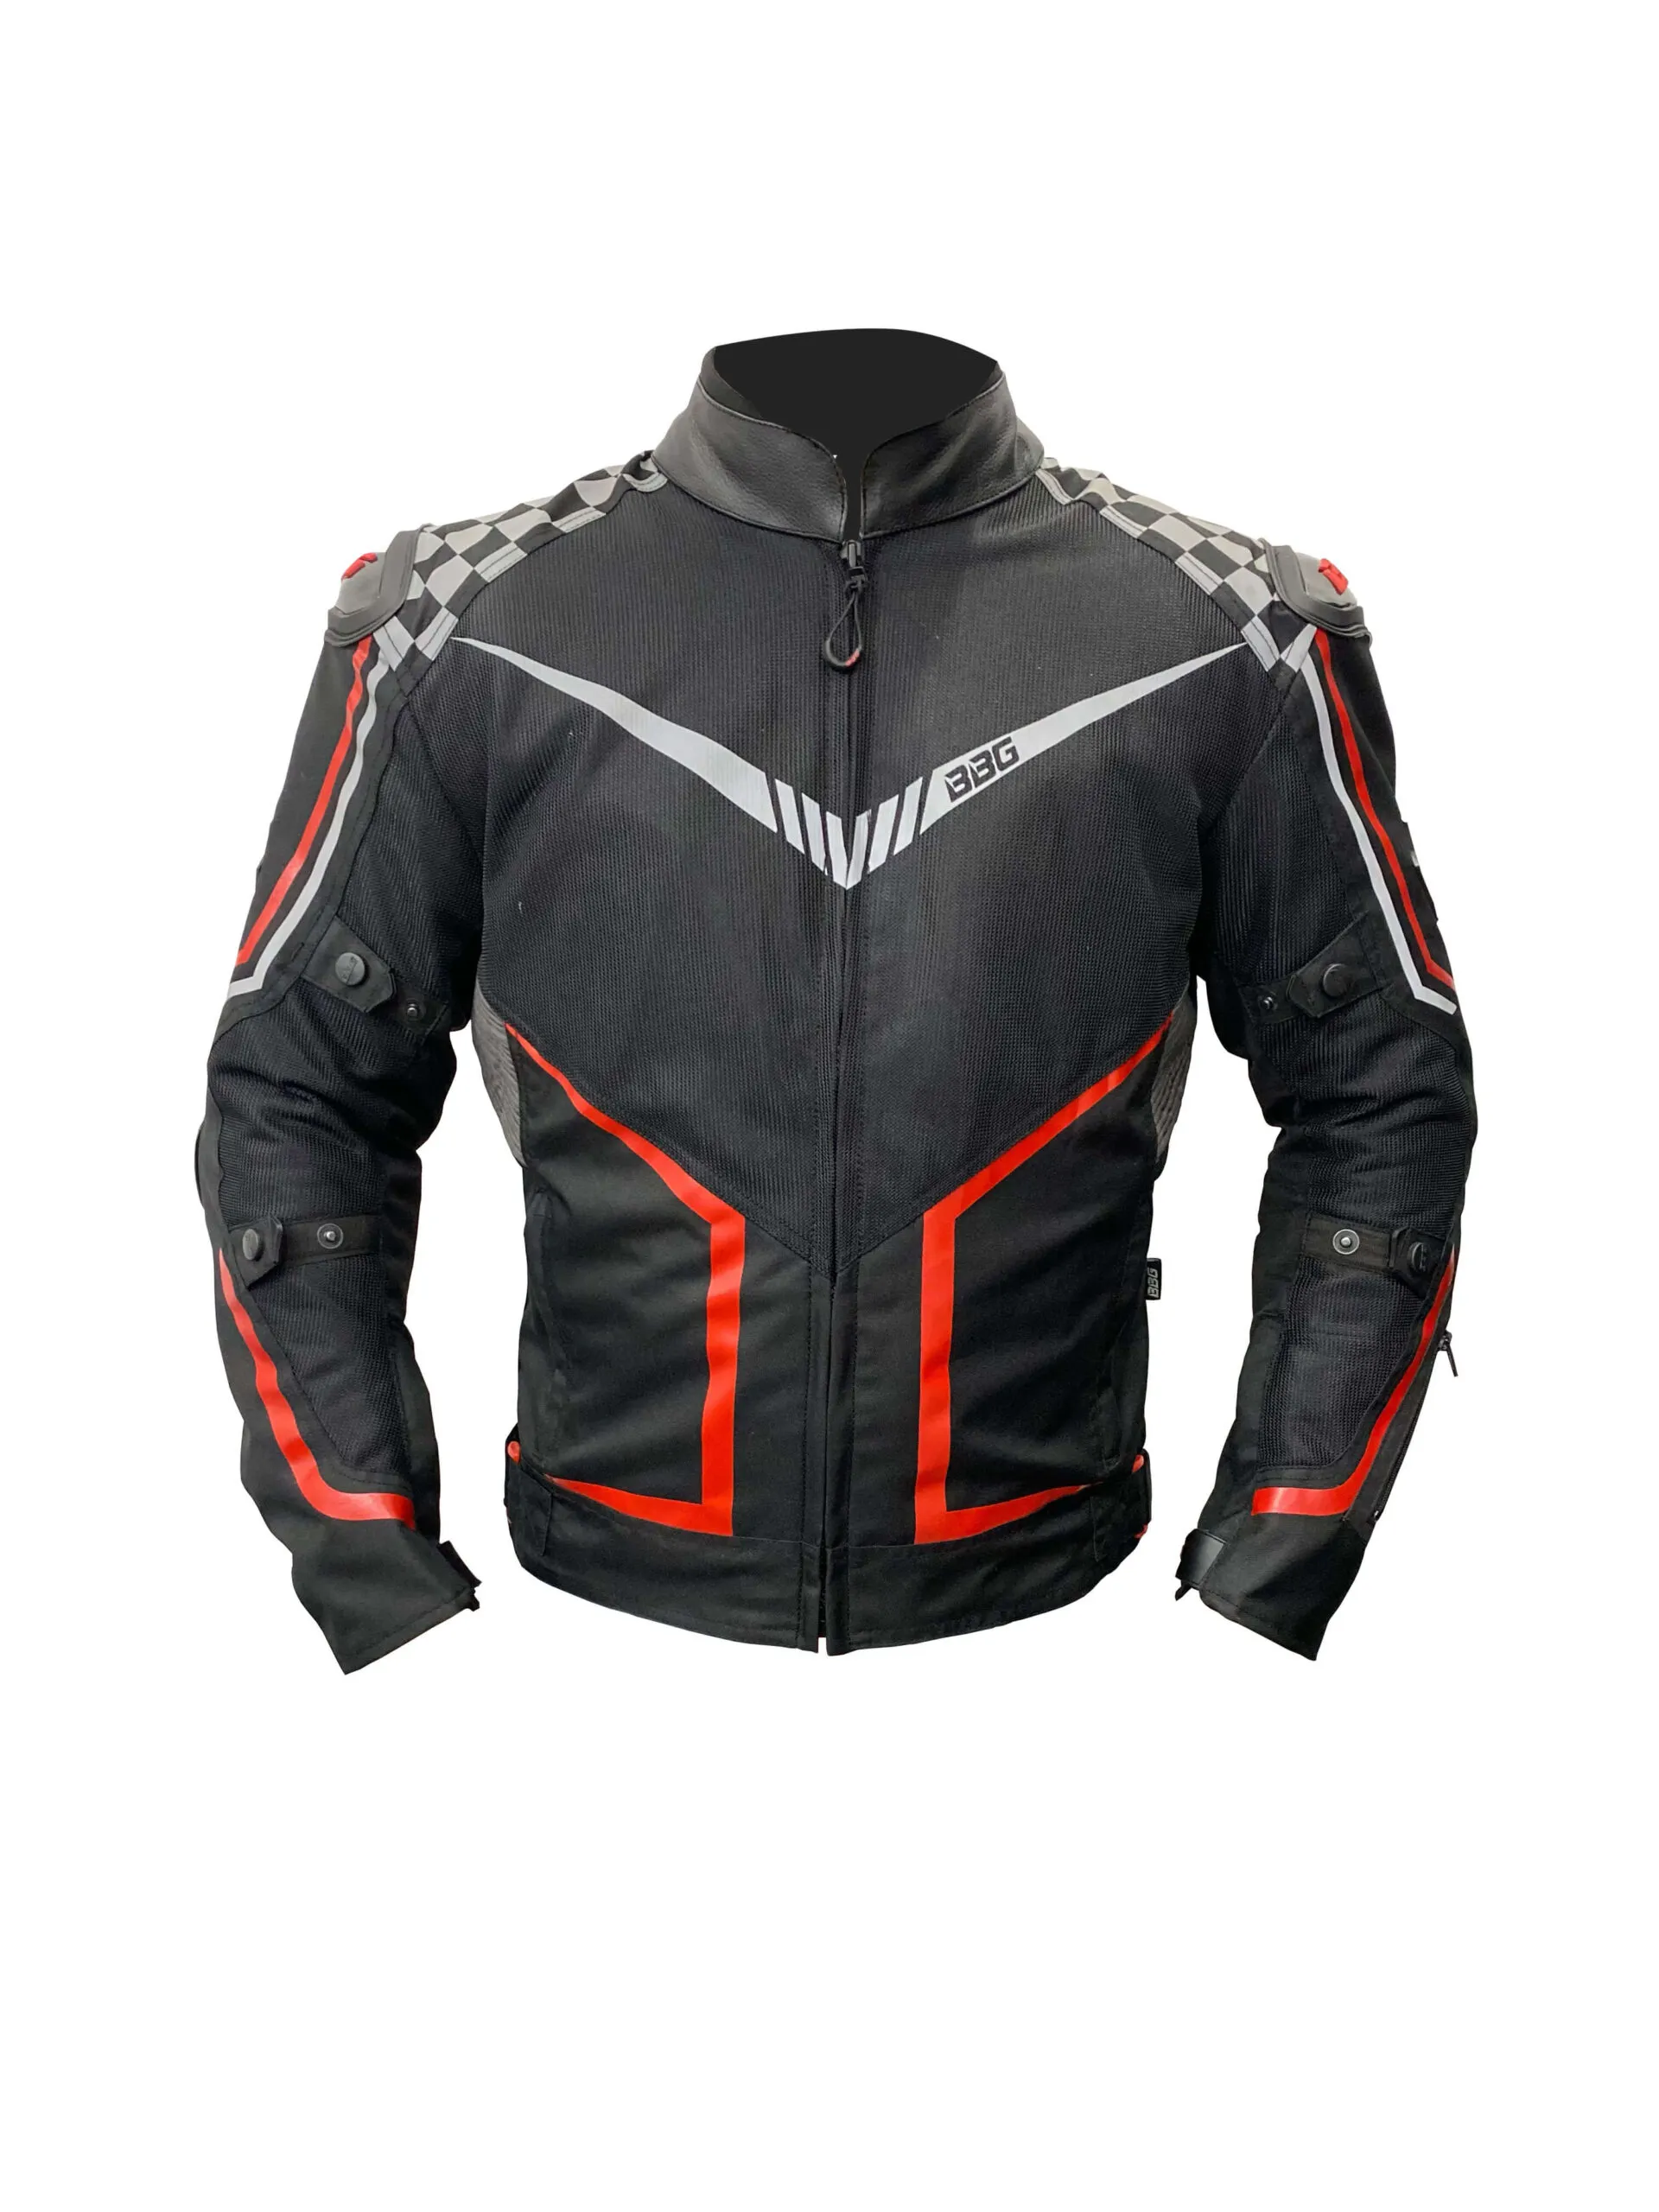 BBG Grand Prix (Race Hump) Black Red Riding Jacket | Buy online in India